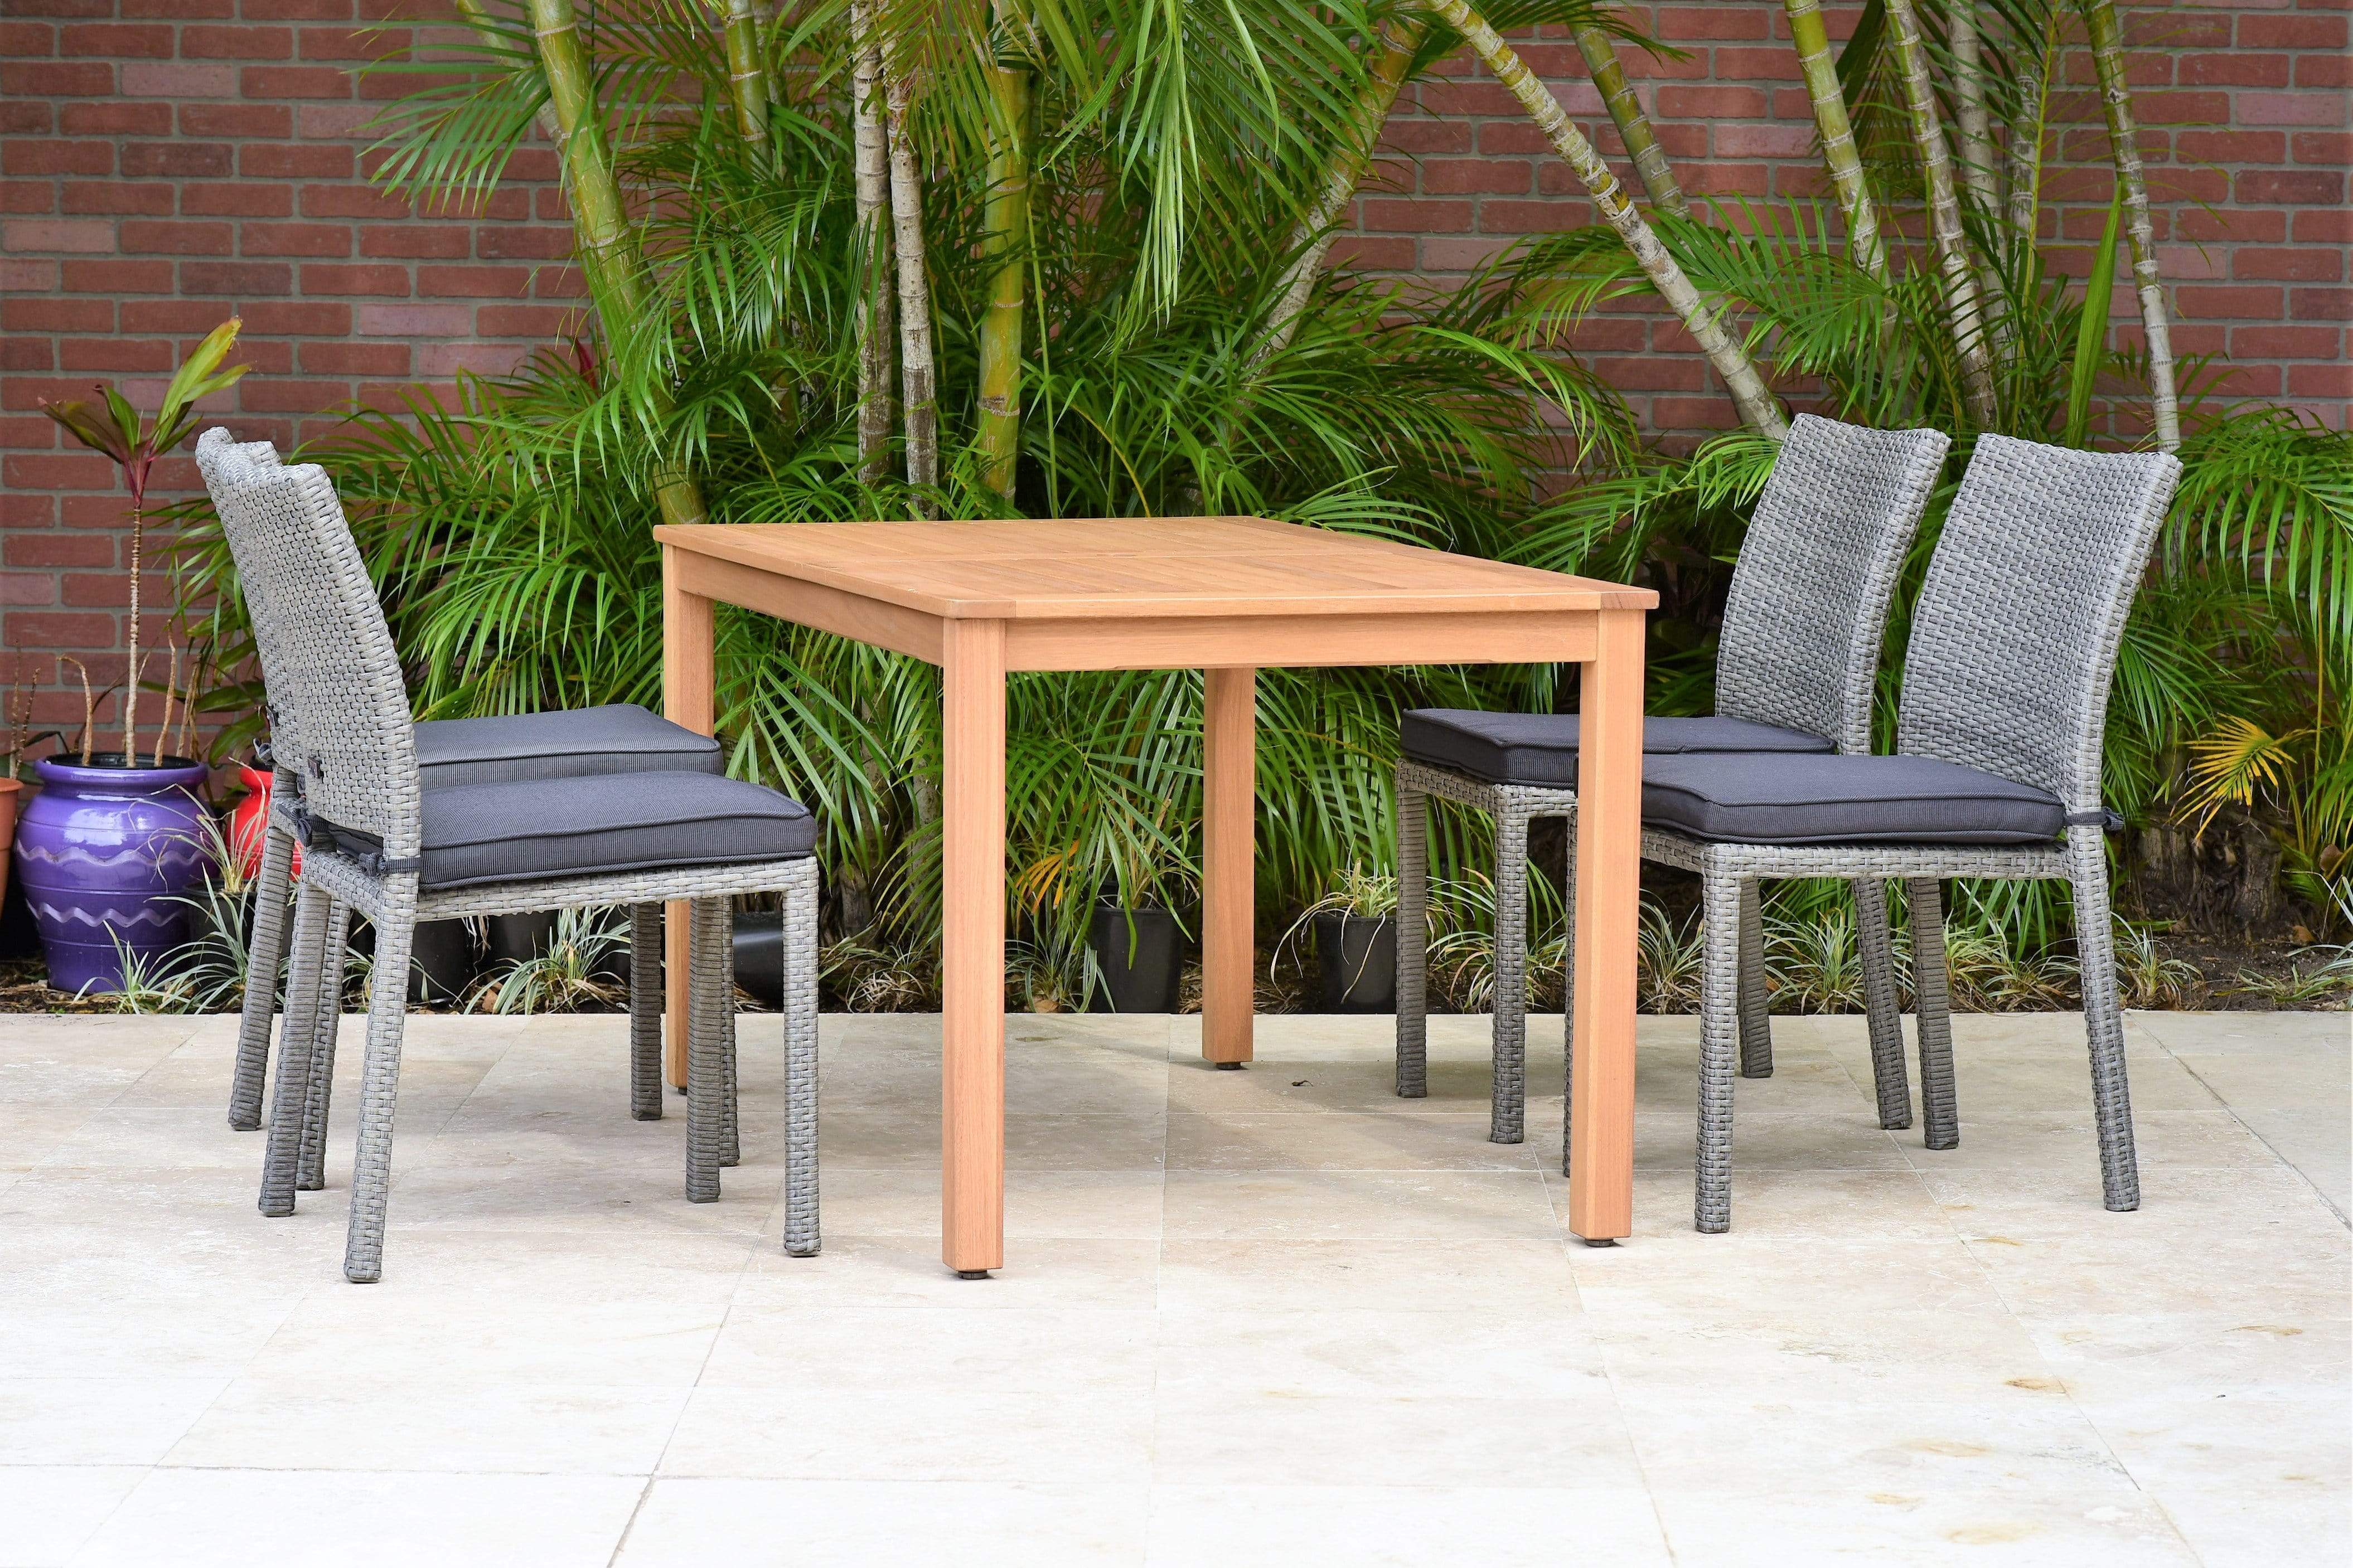 Amazonia Outdoor Teak Dining Set Amazonia Brooklyn 5 Piece Rectangular Eucalyptus Patio Dining set | Teak Finish and Grey Wicker Chairs | Durable and Ideal for Outdoors ORLRECLOT_4LIBSDGRGR